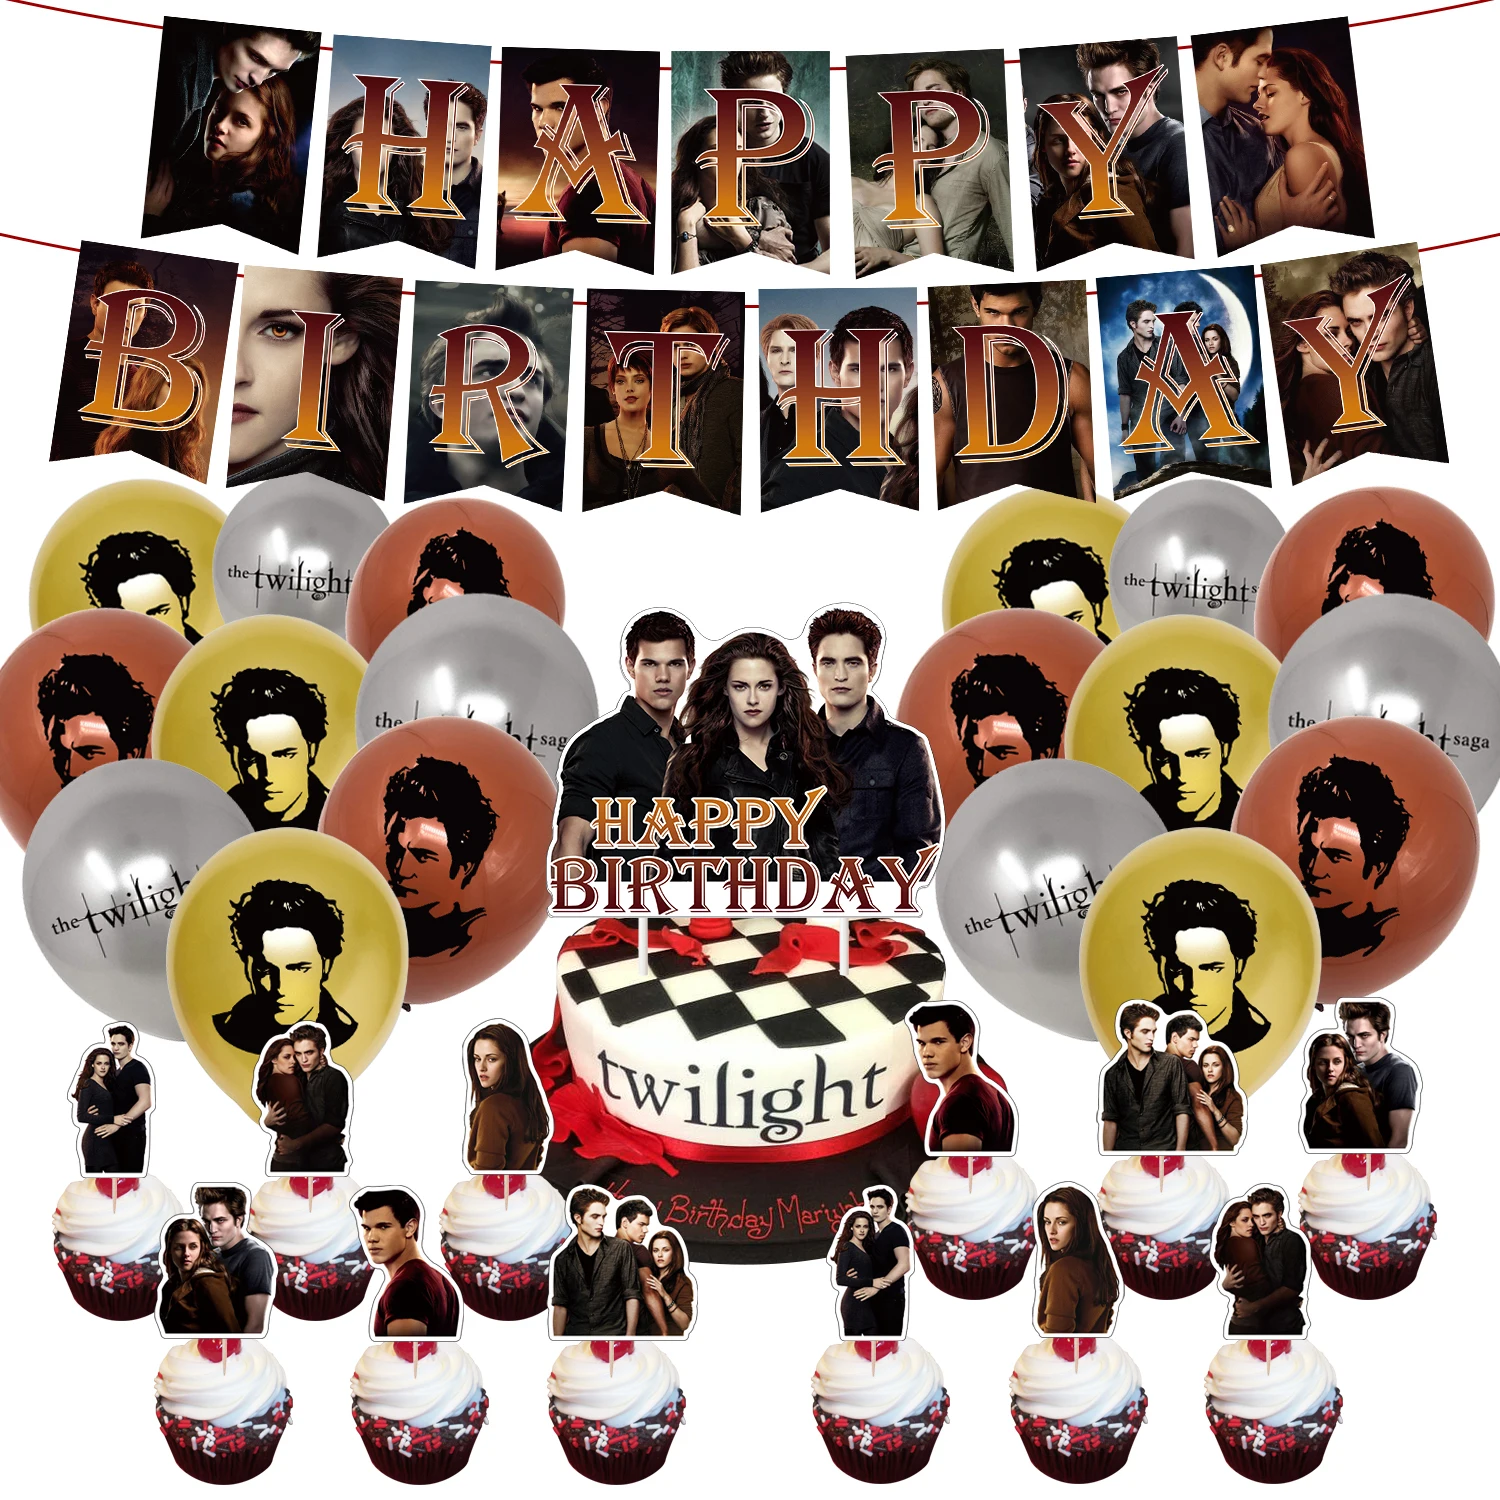 

TV play The Twilight Saga Party Decorations Banner Balloons Cake Toppers For Birthday Party Decor Supplies Favor